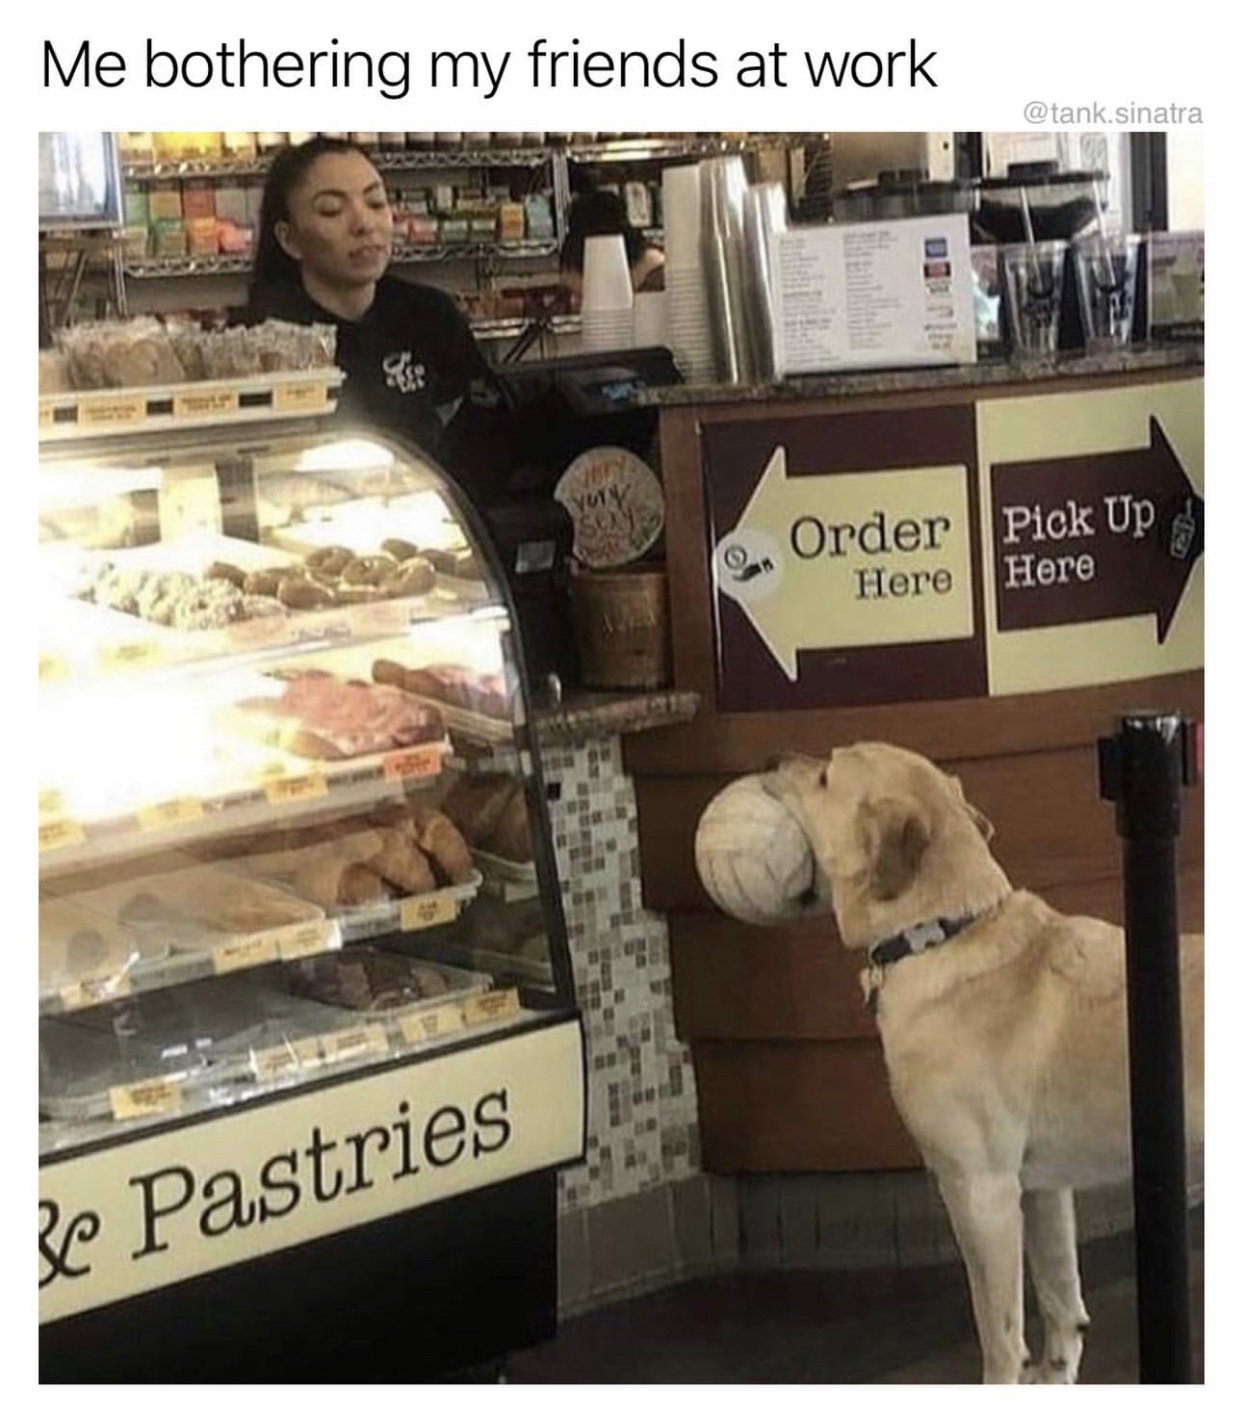 dog - Me bothering my friends at work .sinatra Pick Up on Order Here Here Be Pastries